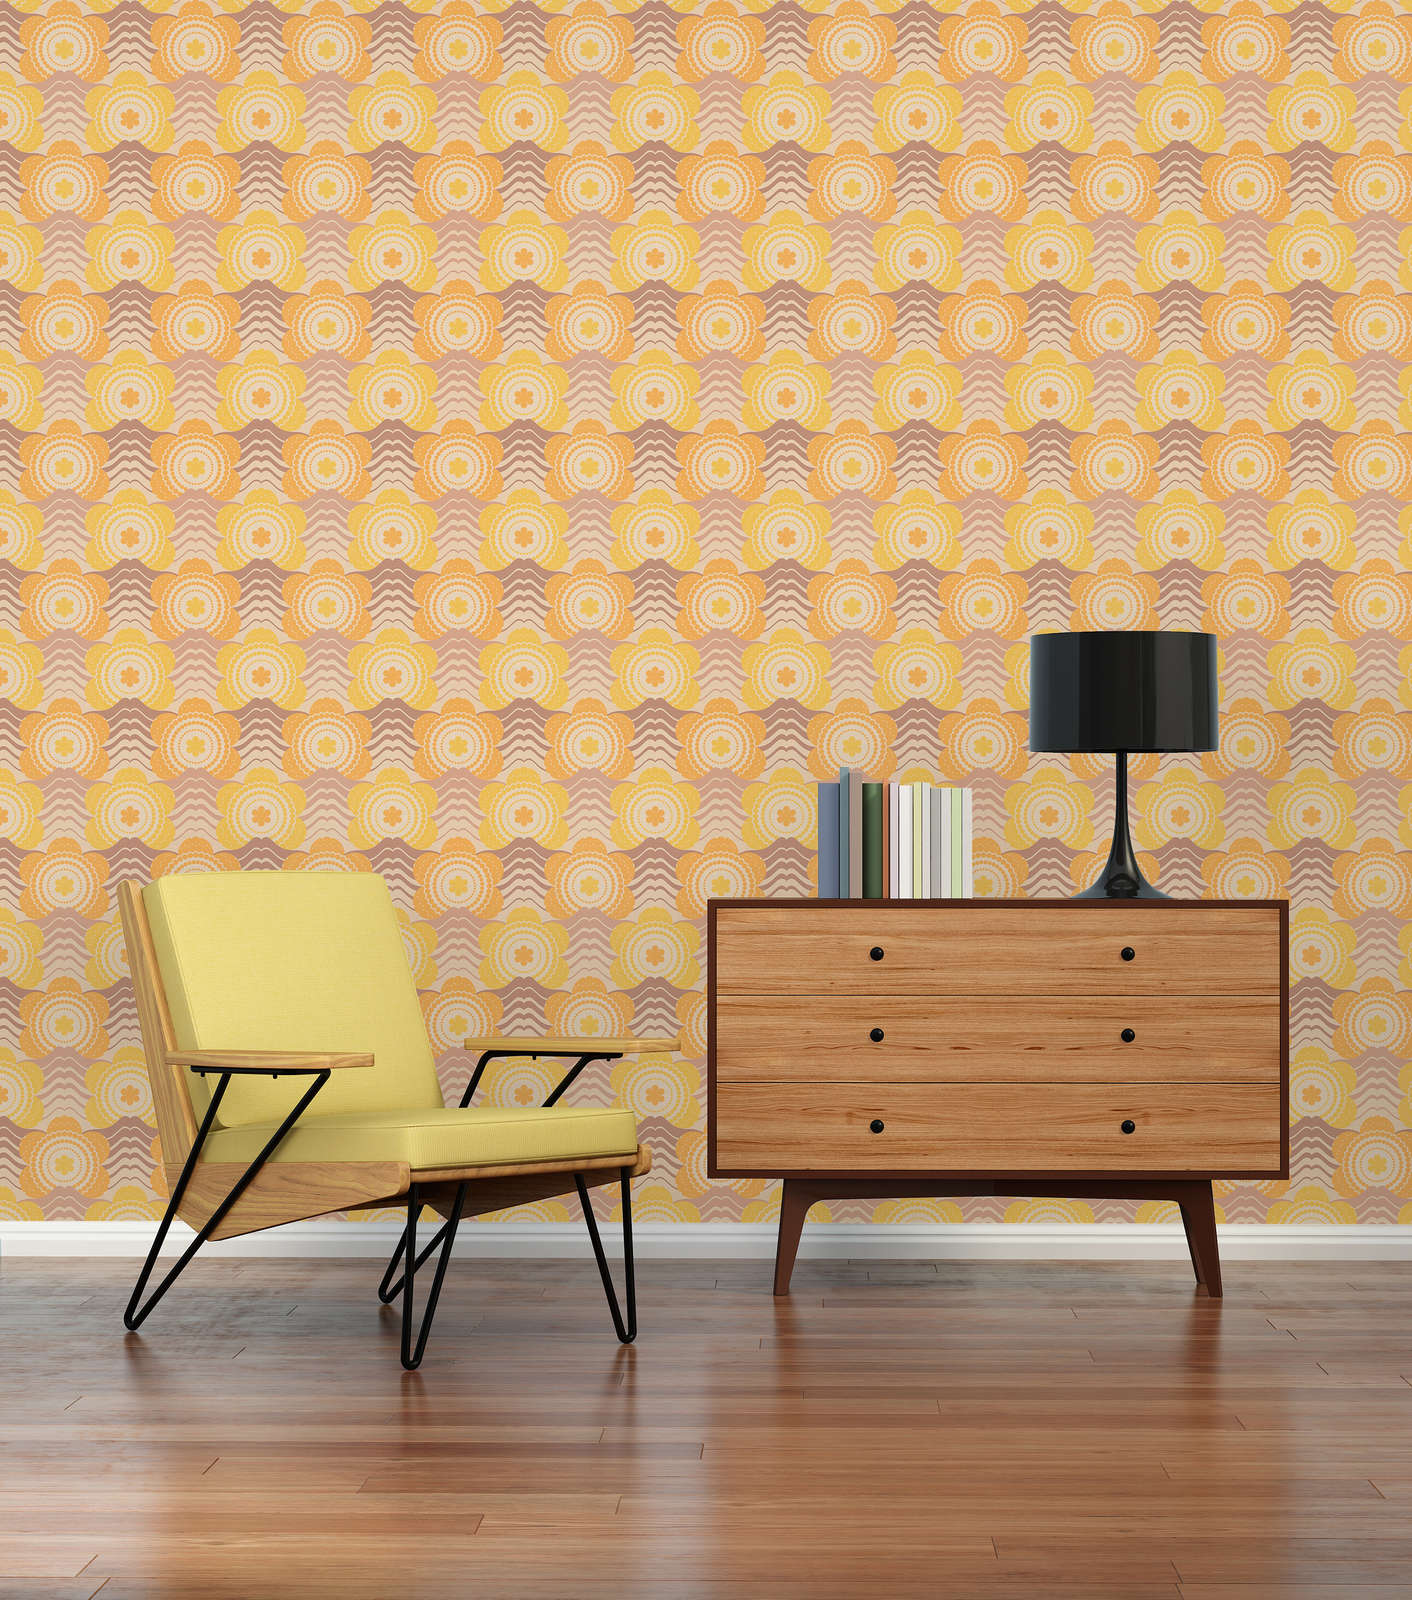             Non-woven wallpaper with floral pattern in 70s style - beige, brown, orange
        